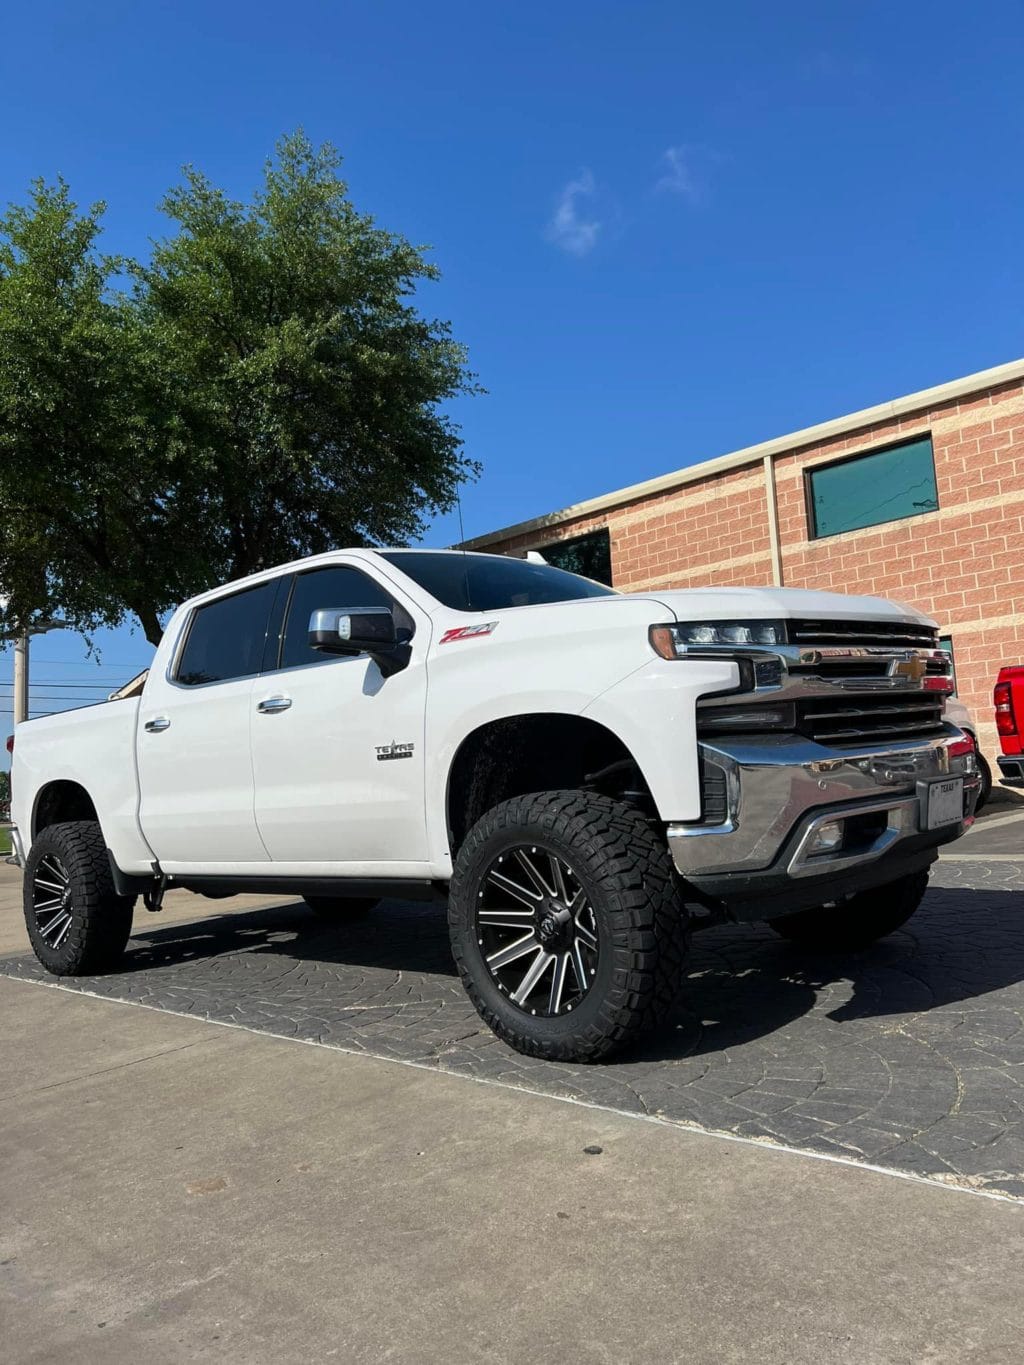 6in lift kit suspension on a white truck